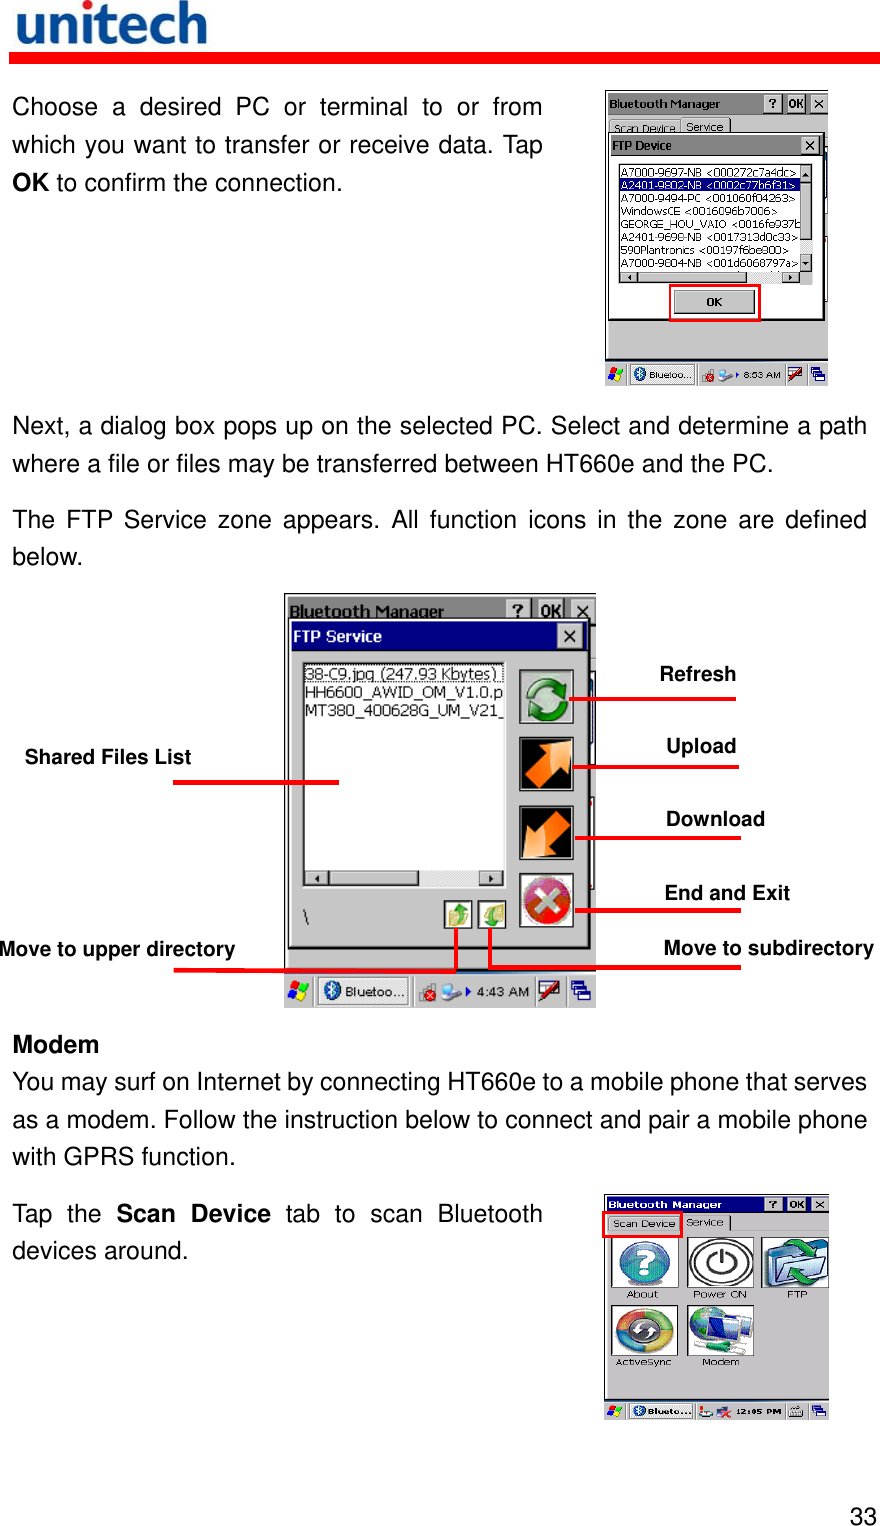   33 receive data. Tap OK to confirm the connection. Choose a desired PC or terminal to or from which you want to transfer or  Next, a dialog box pops up on the selected PC. Swhere a file or files may be transferred between HThe FTP Service zone appearelect and determine a path T660e and the PC. s. All function icons in the zone are defined below. Refresh  Modem Y nternet by connecting HT660e to a mobile phone that serves as a modem. Follow the instruction below to connect and pa e with GPRS function. Tap the Scan Device tab to scan Bluetoothou may surf on Iir a mobile phondevices around.  Shared Files List  Upload Download End and Exit Move to subdirectoryMove to upper directory 